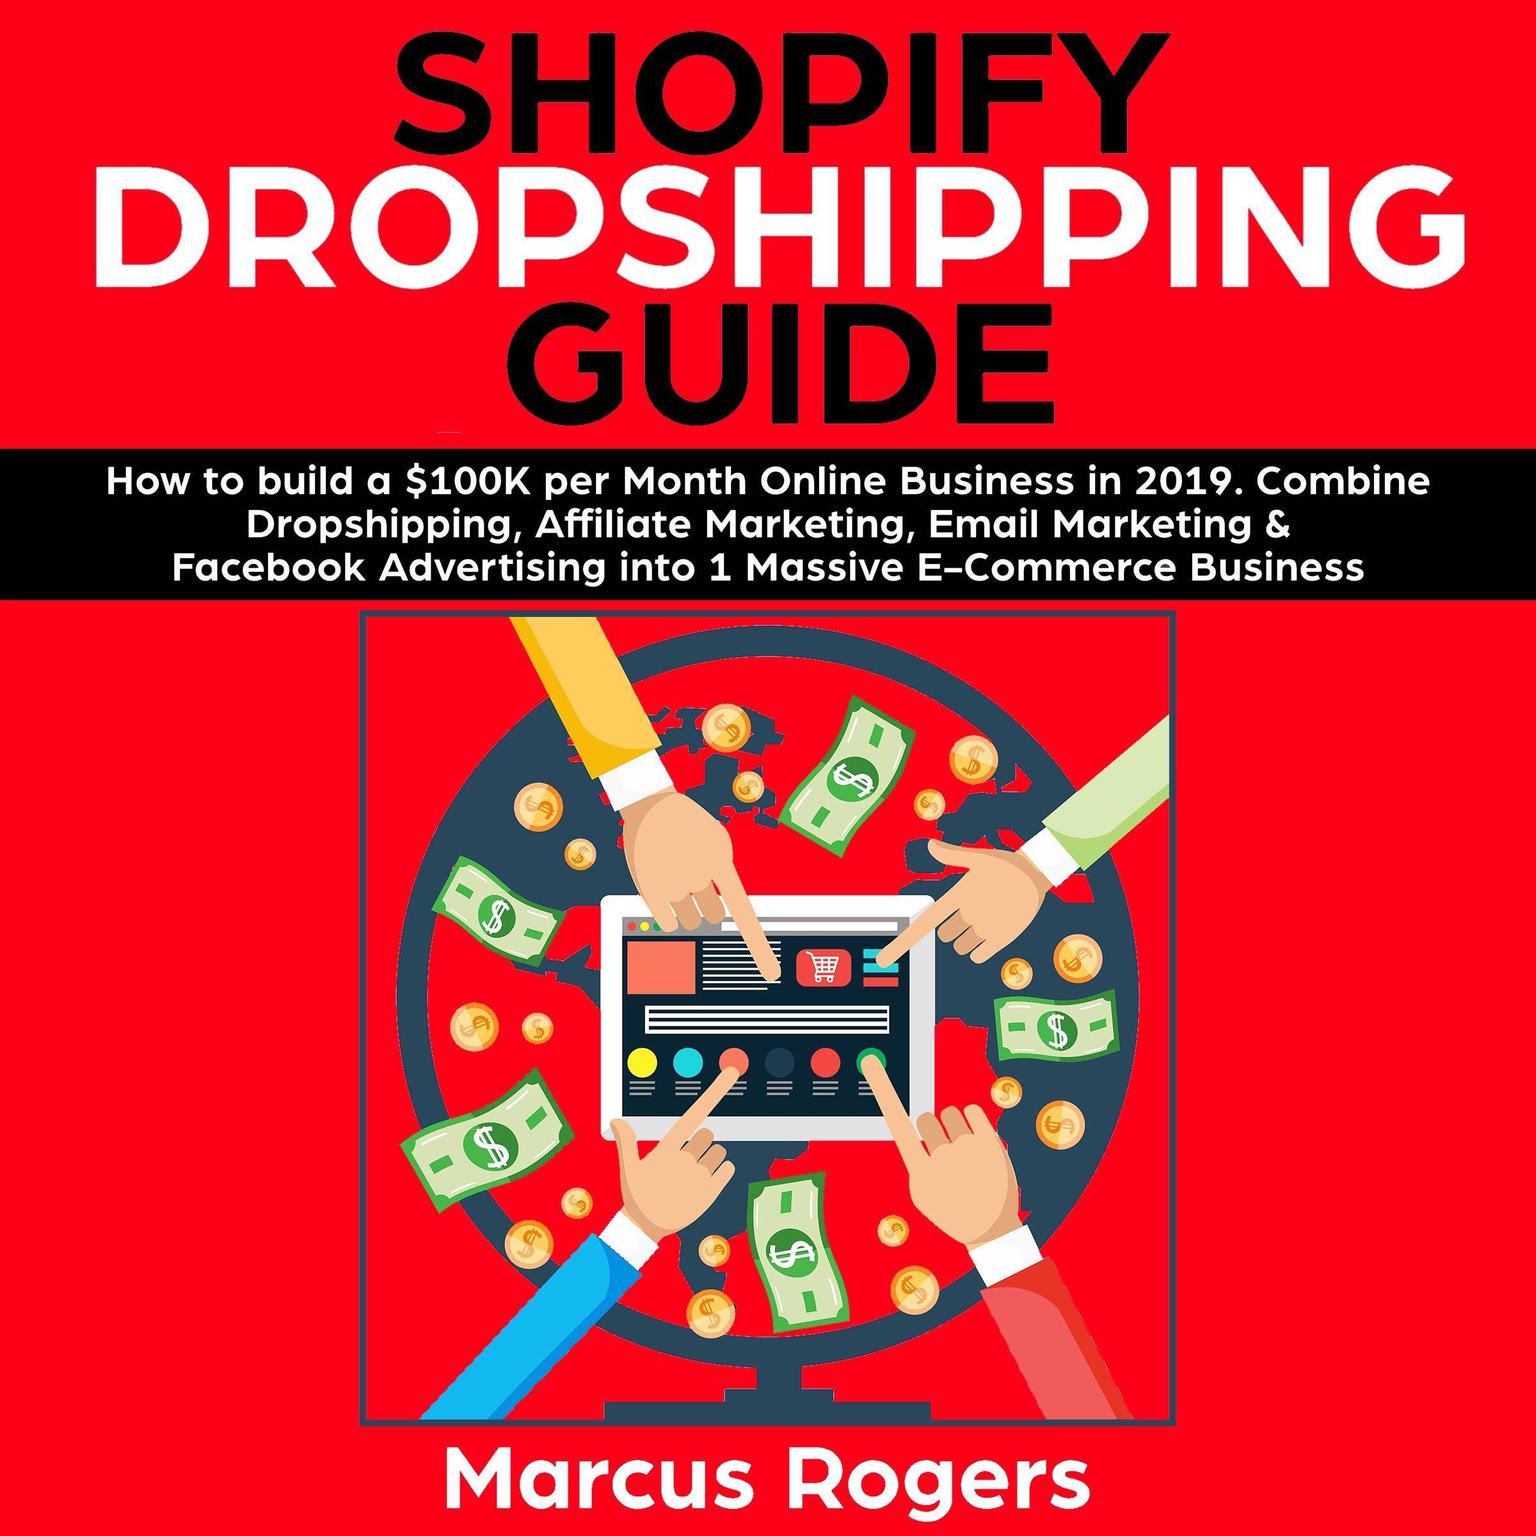 Shopify Dropshipping Guide: How to build a $100K per Month Online Business in 2019. Combine Dropshipping, Affiliate Marketing, Email Marketing & Facebook Advertising into 1 Massive E-Commerce Business: How to build a $100K per Month Online Business in 2019. Combine Dropshipping, Affiliate Marketing, Email Marketing & Facebook Advertising into 1 Massive E-Commerce Business Audiobook, by Marcus Rogers